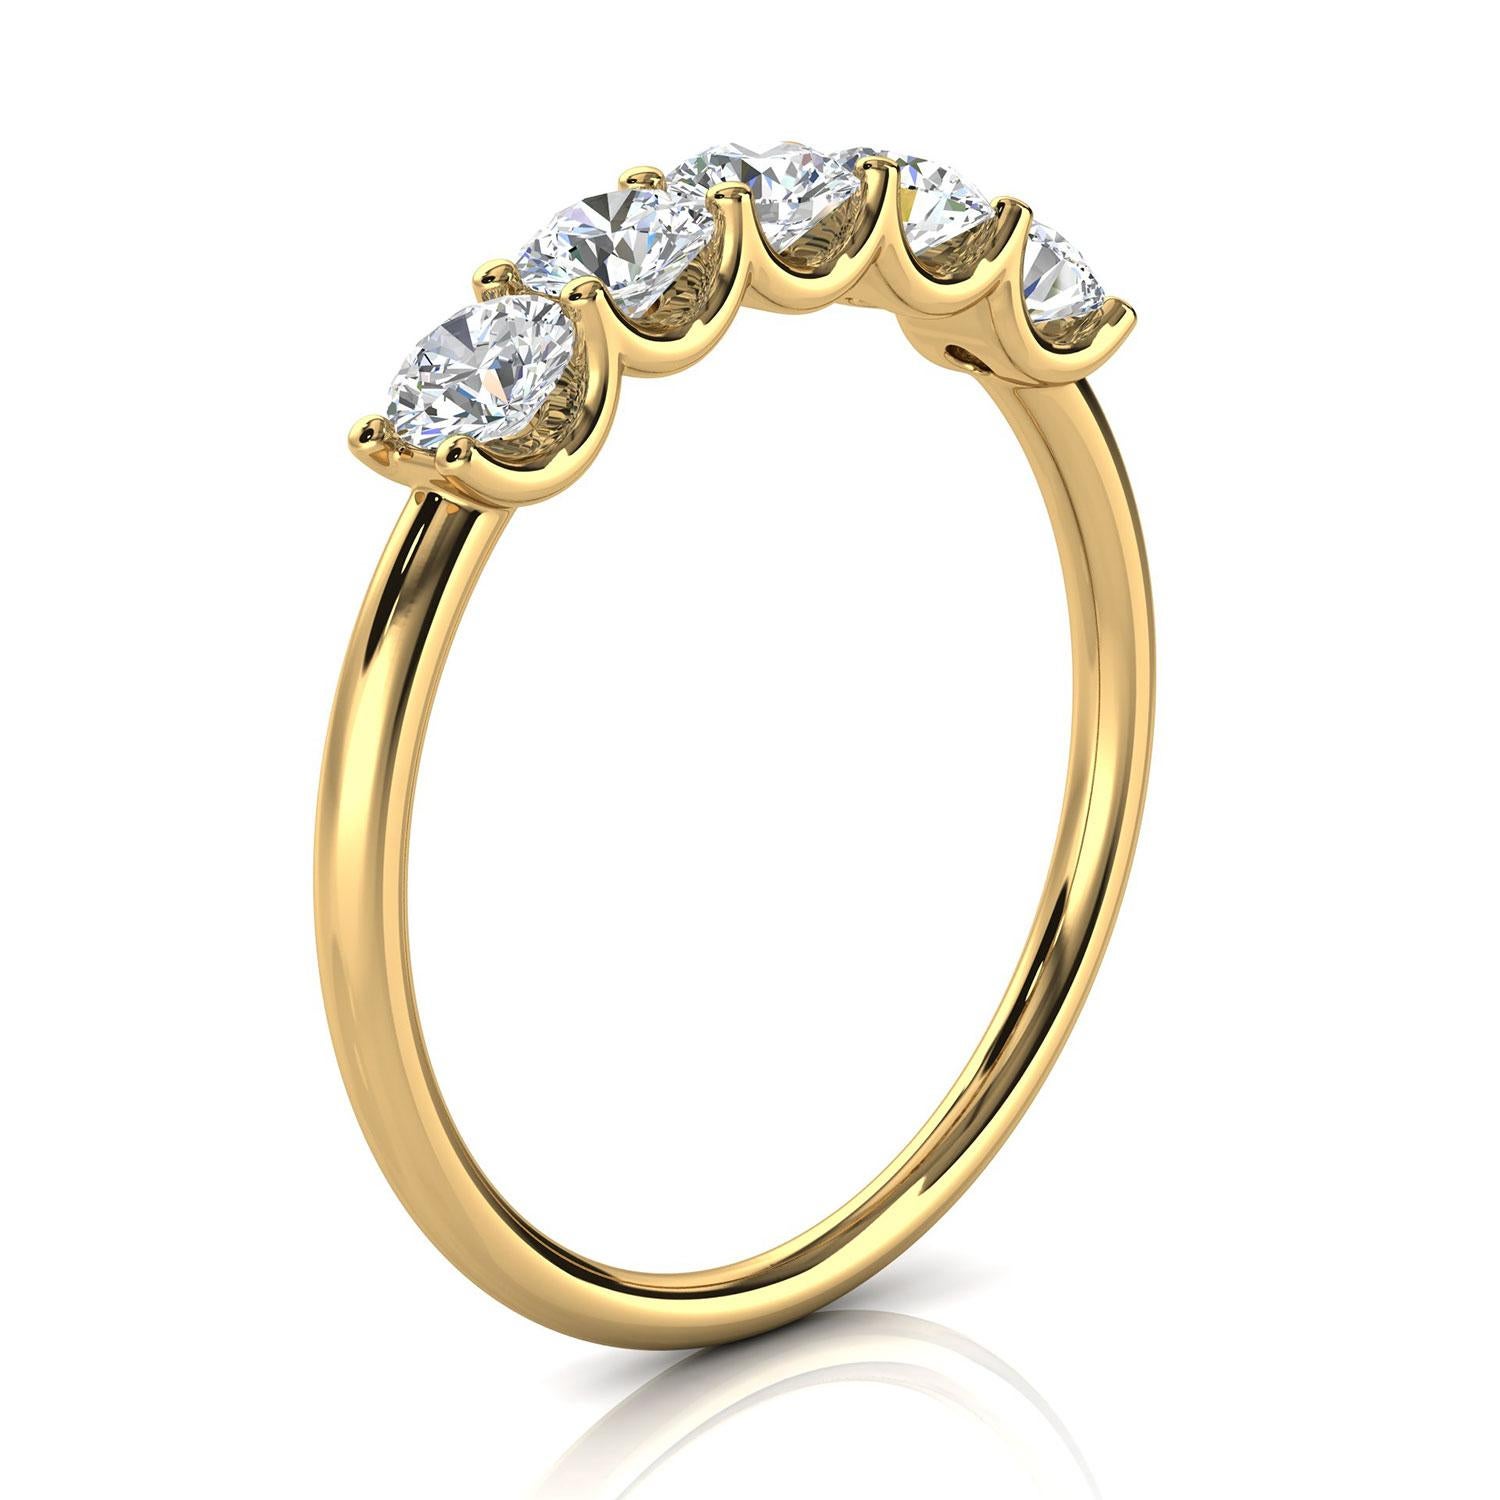 This ring features five(5) floating Brilliante round diamonds set in 